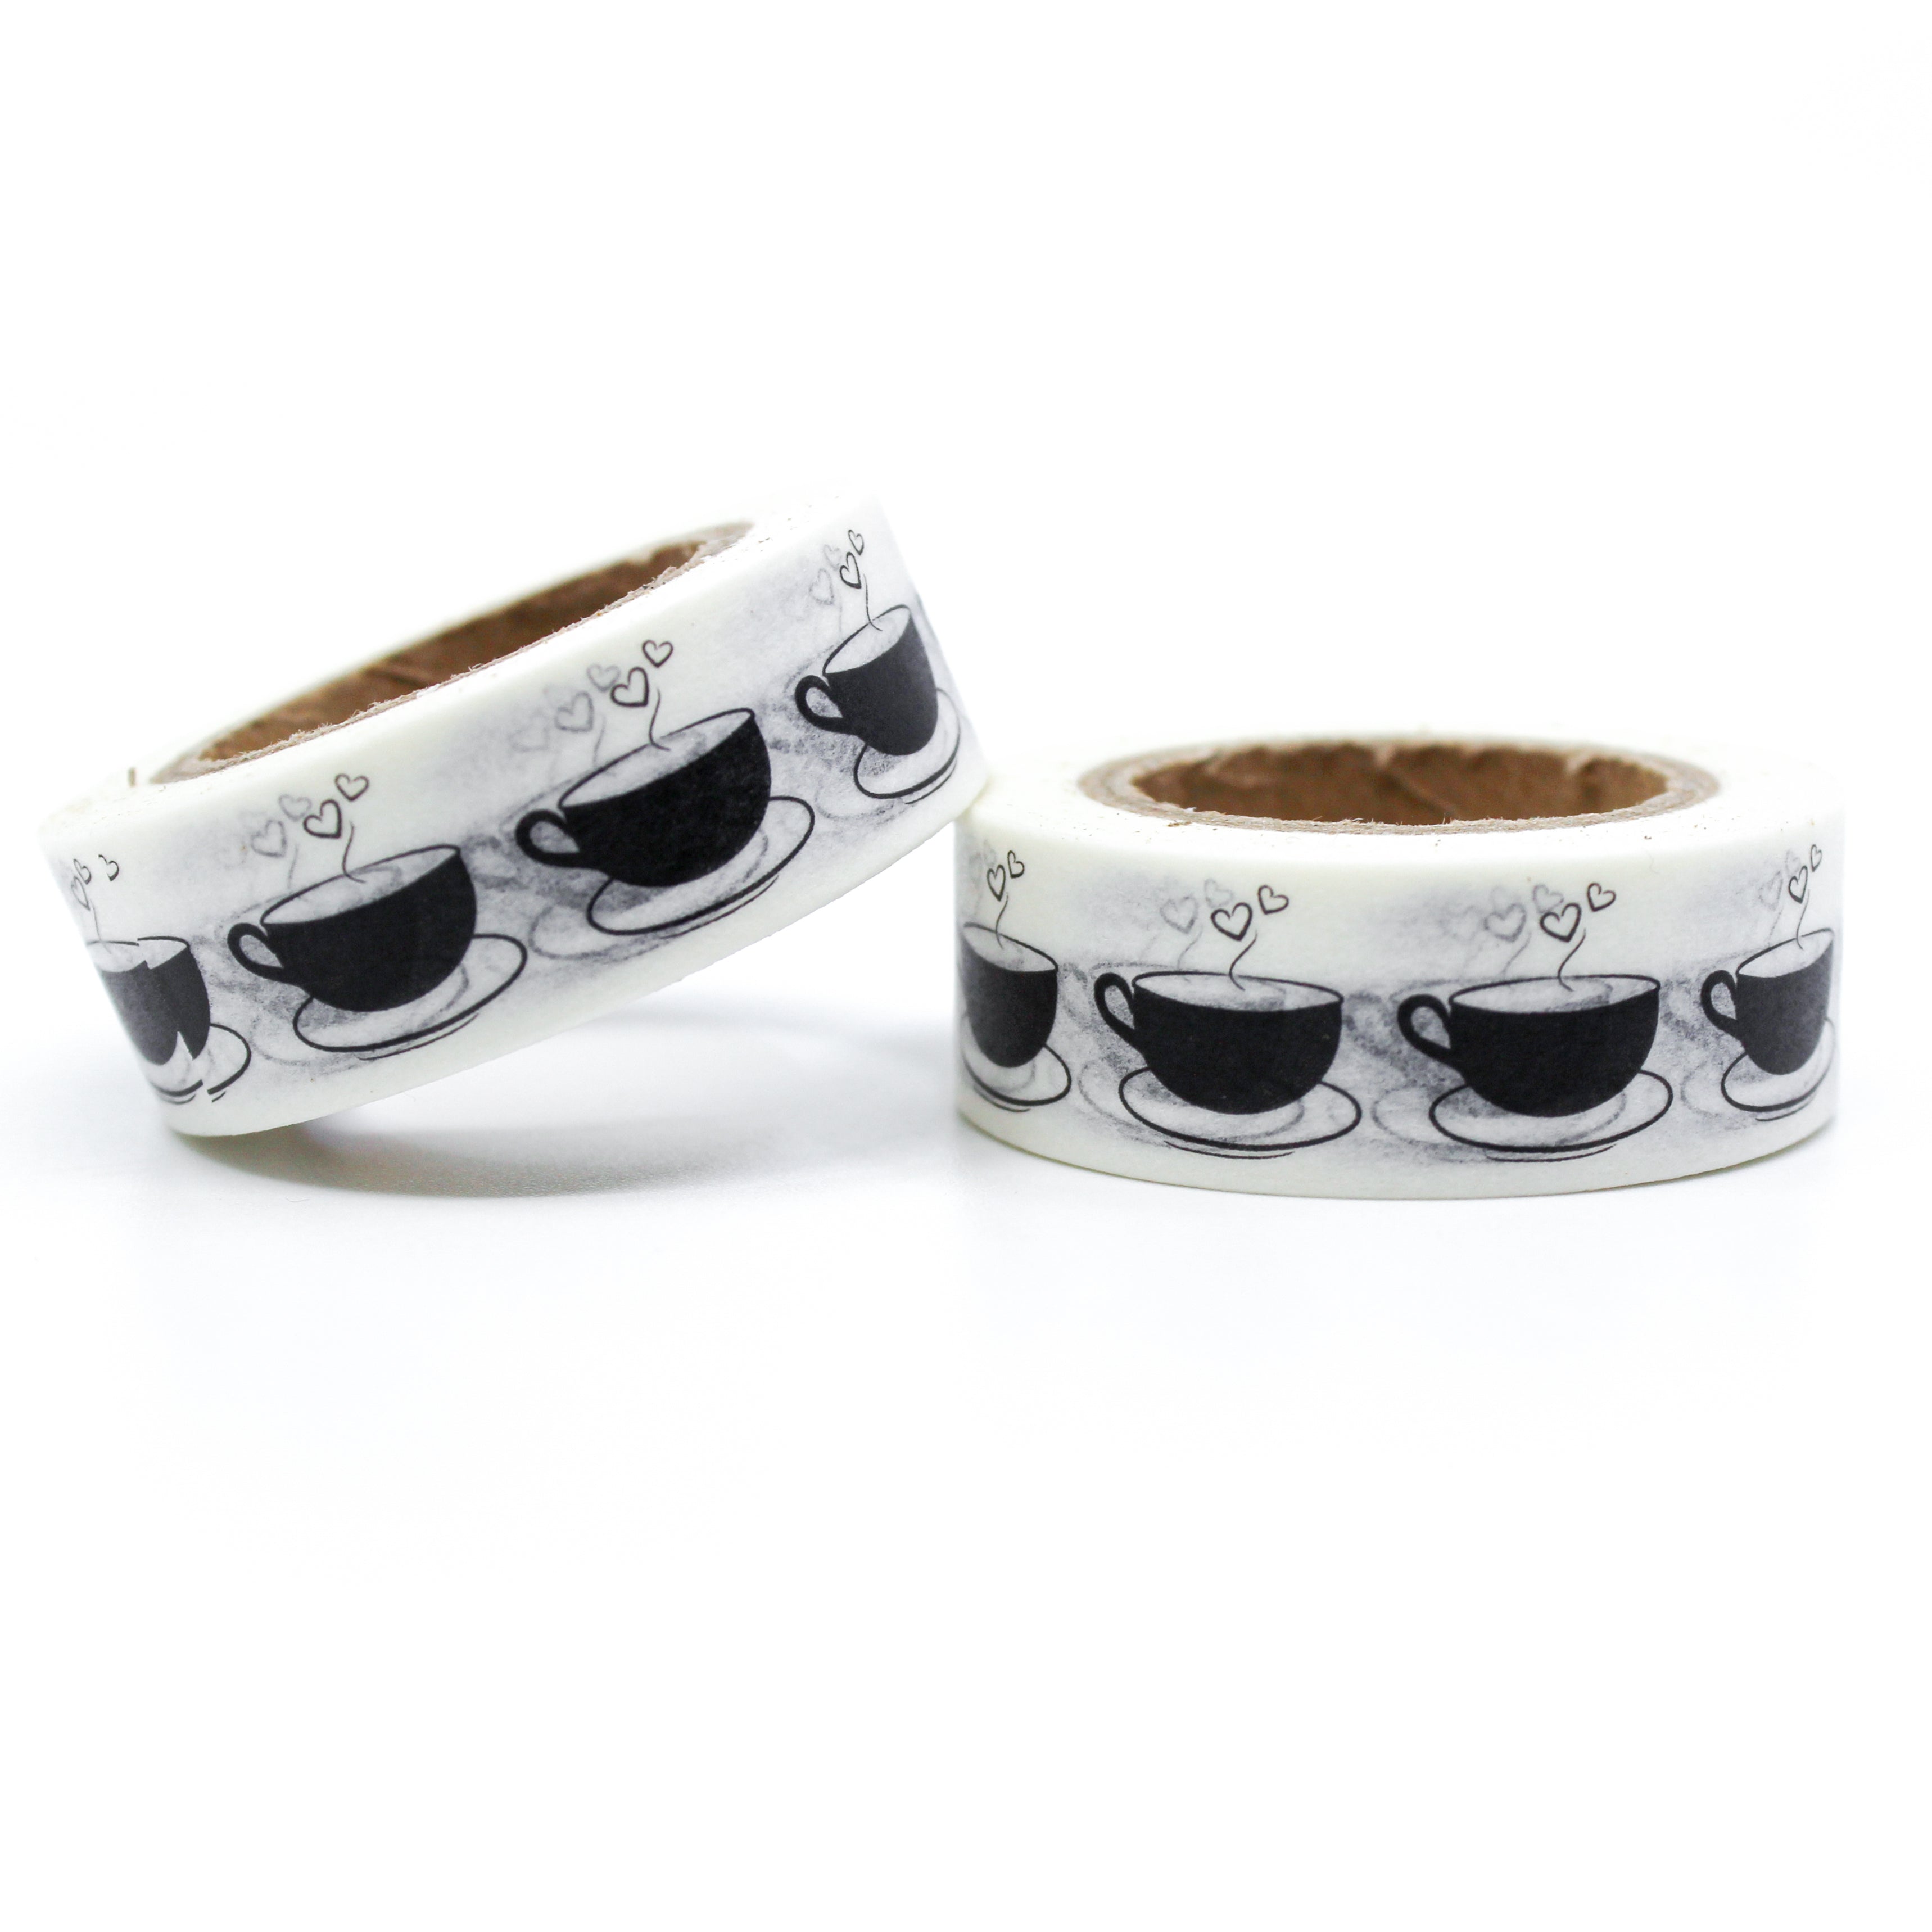 This is a black hot coffee cups or black coffee for Journal Supplies, Scrapbooking washi tapes from BBB Supplies Craft Shop